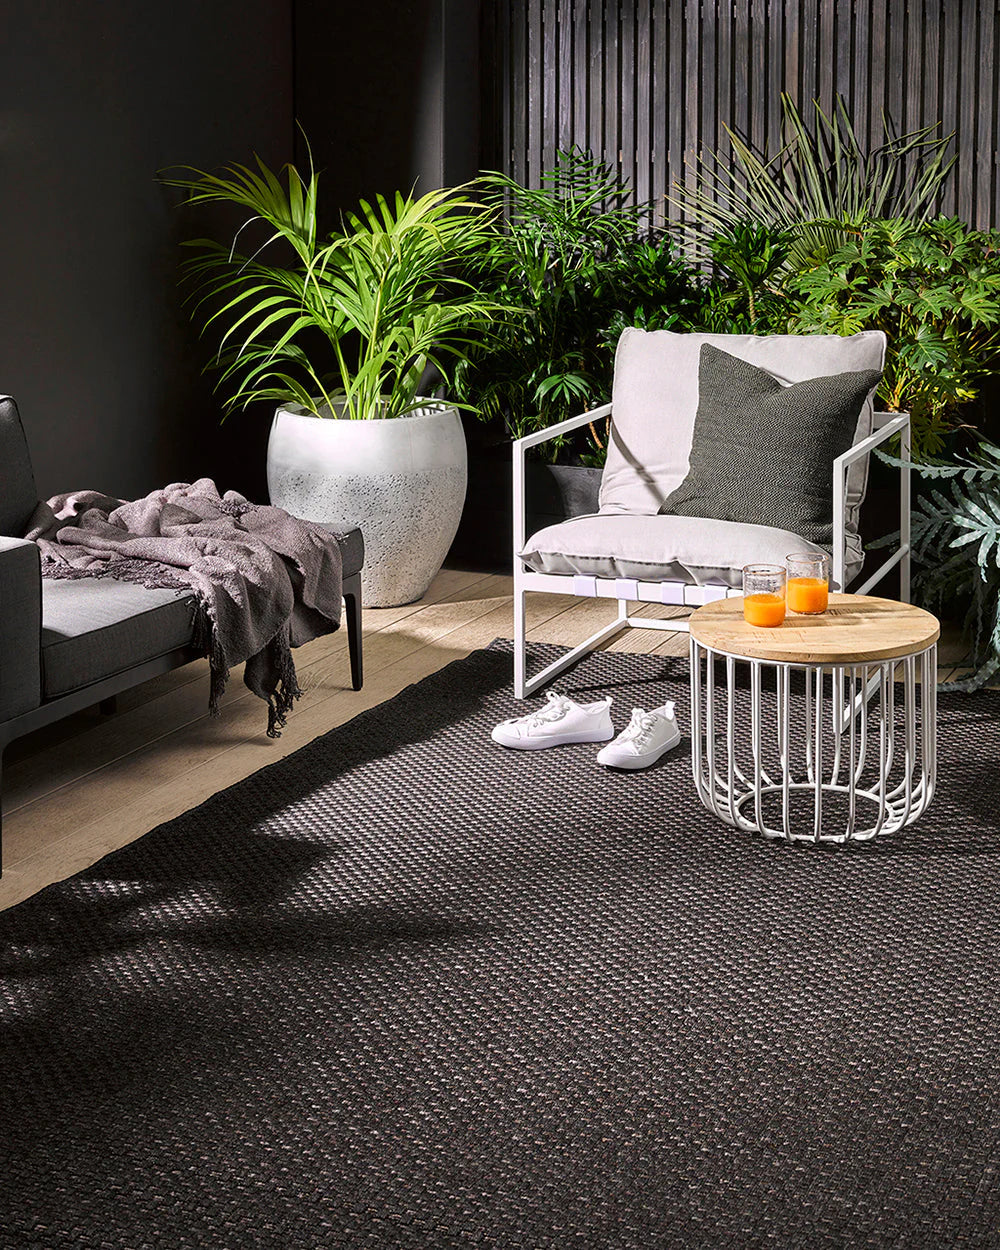 Flax Charcoal Outdoor Floor Rug from Baya Furtex Stockist Make Your House A Home, Furniture Store Bendigo. Free Australia Wide Delivery.